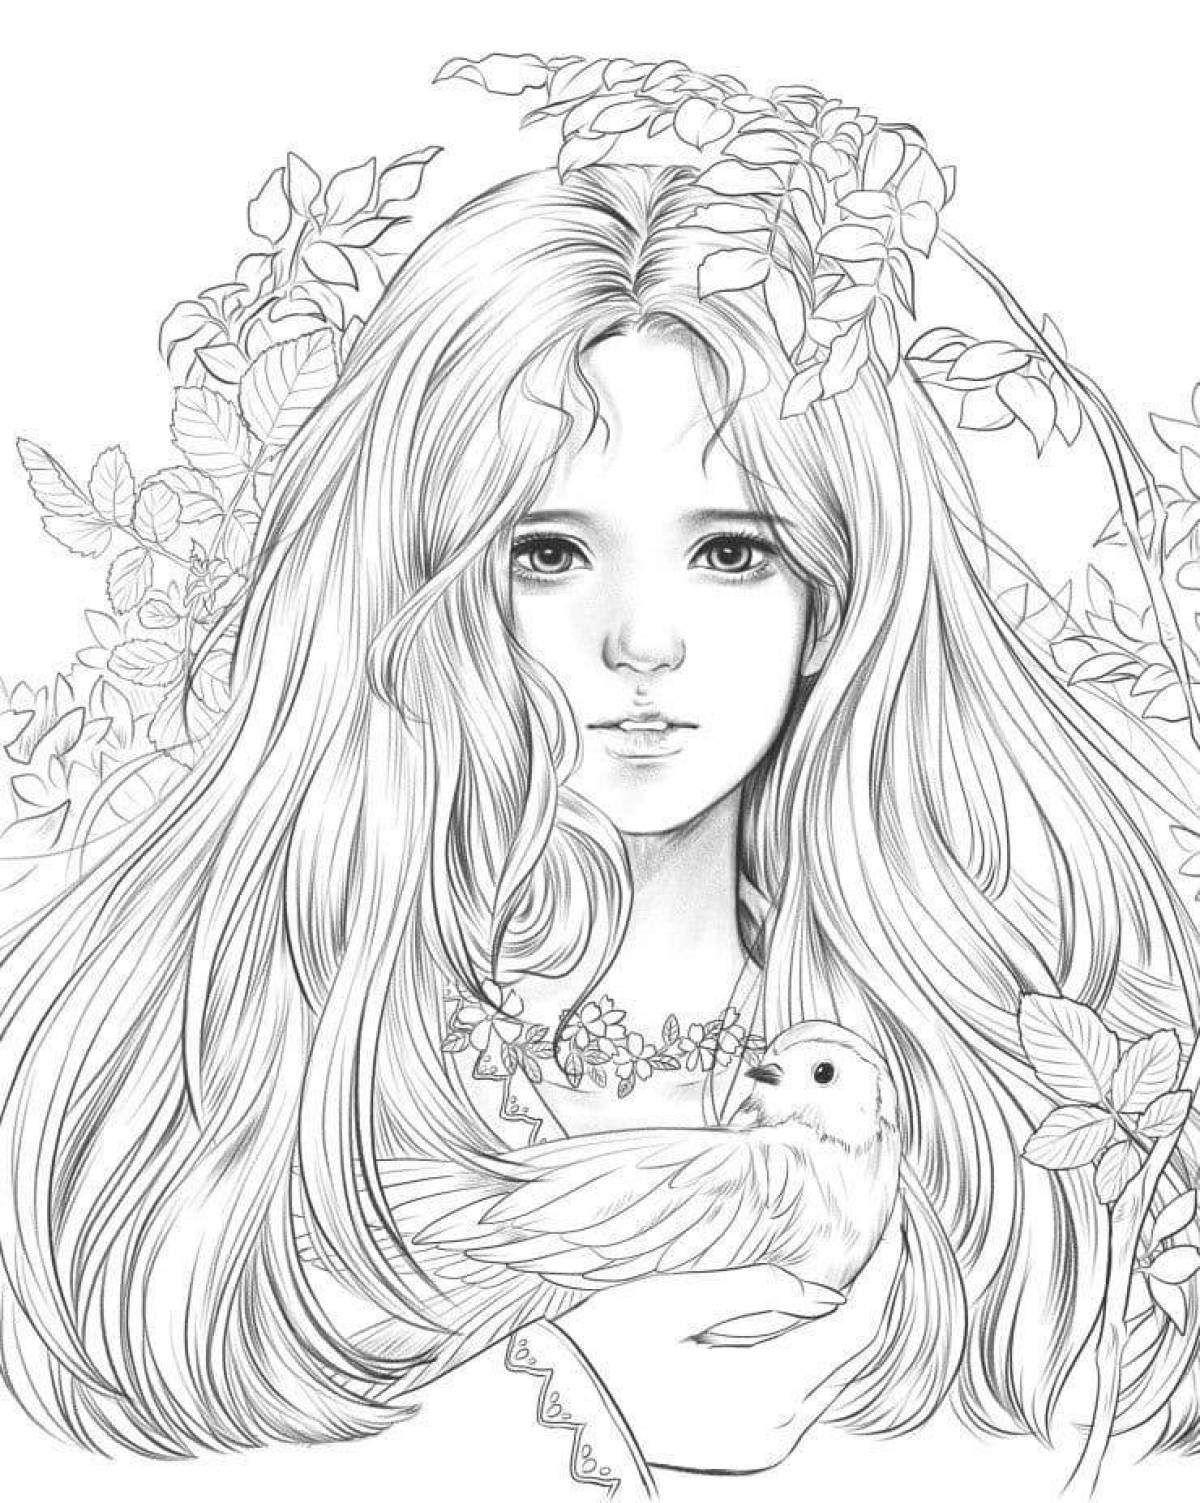 Amazing coloring pages for girls 12 years old